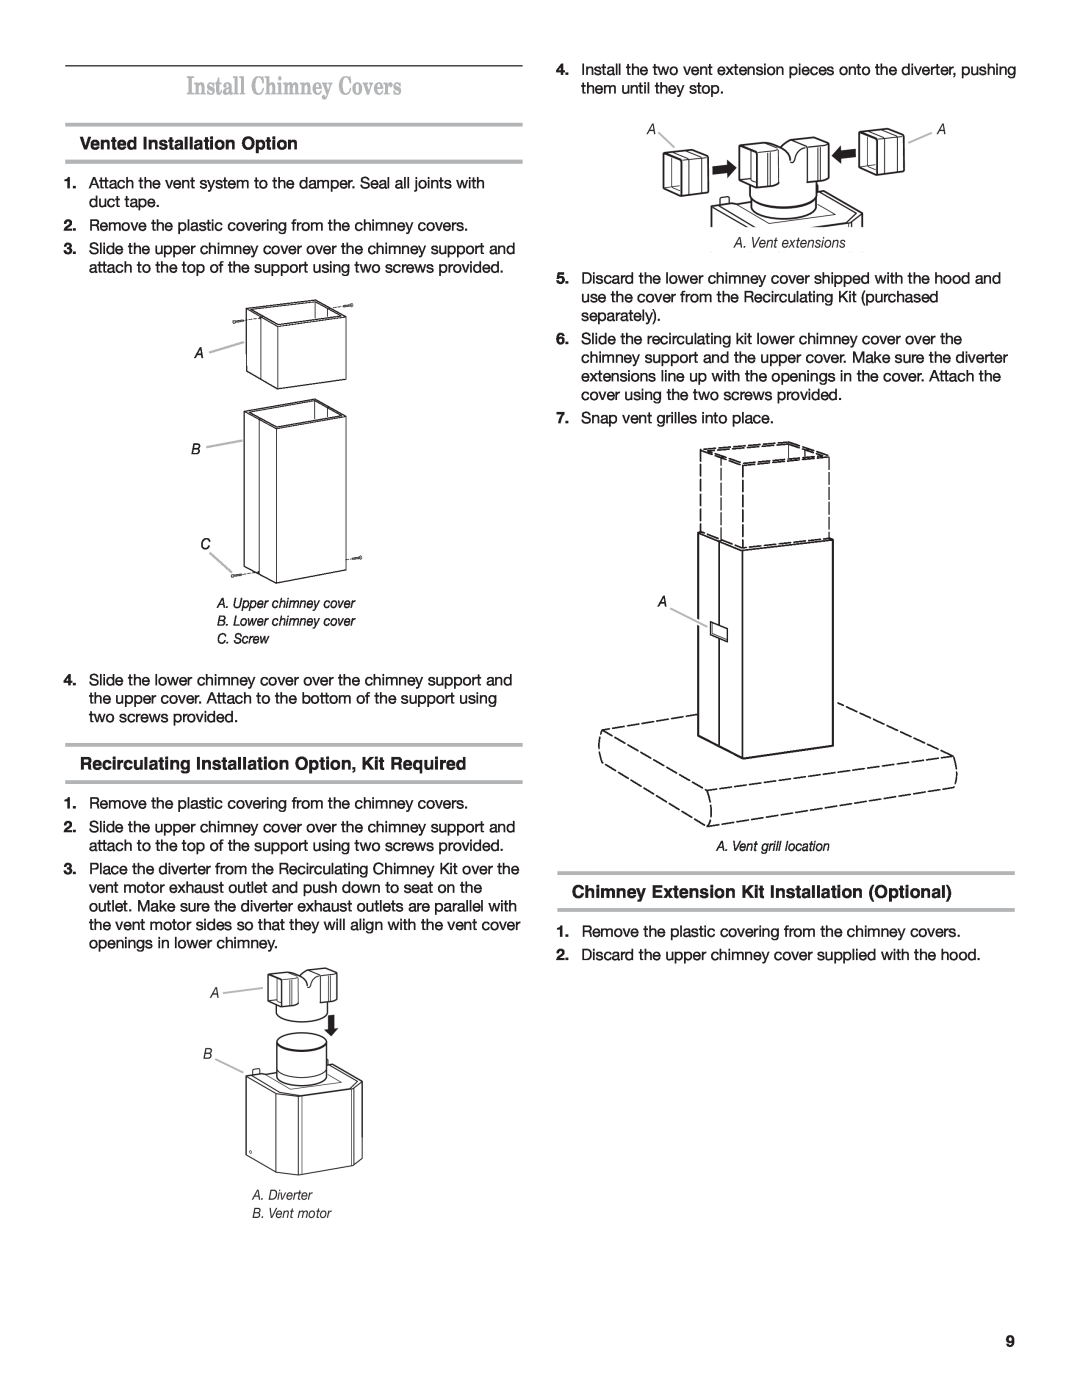 KitchenAid 9760425A Install Chimney Covers, Vented Installation Option, Recirculating Installation Option, Kit Required 